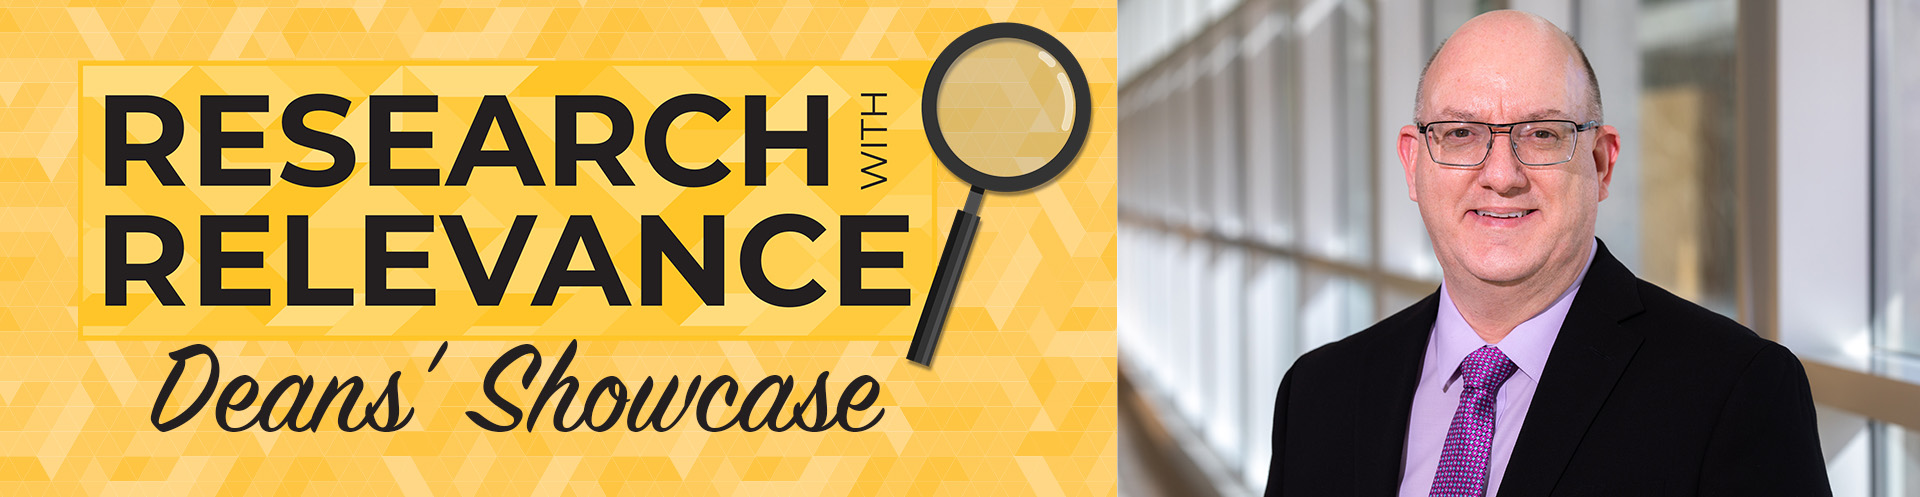 Research with Relevance - Deans' Showcase 